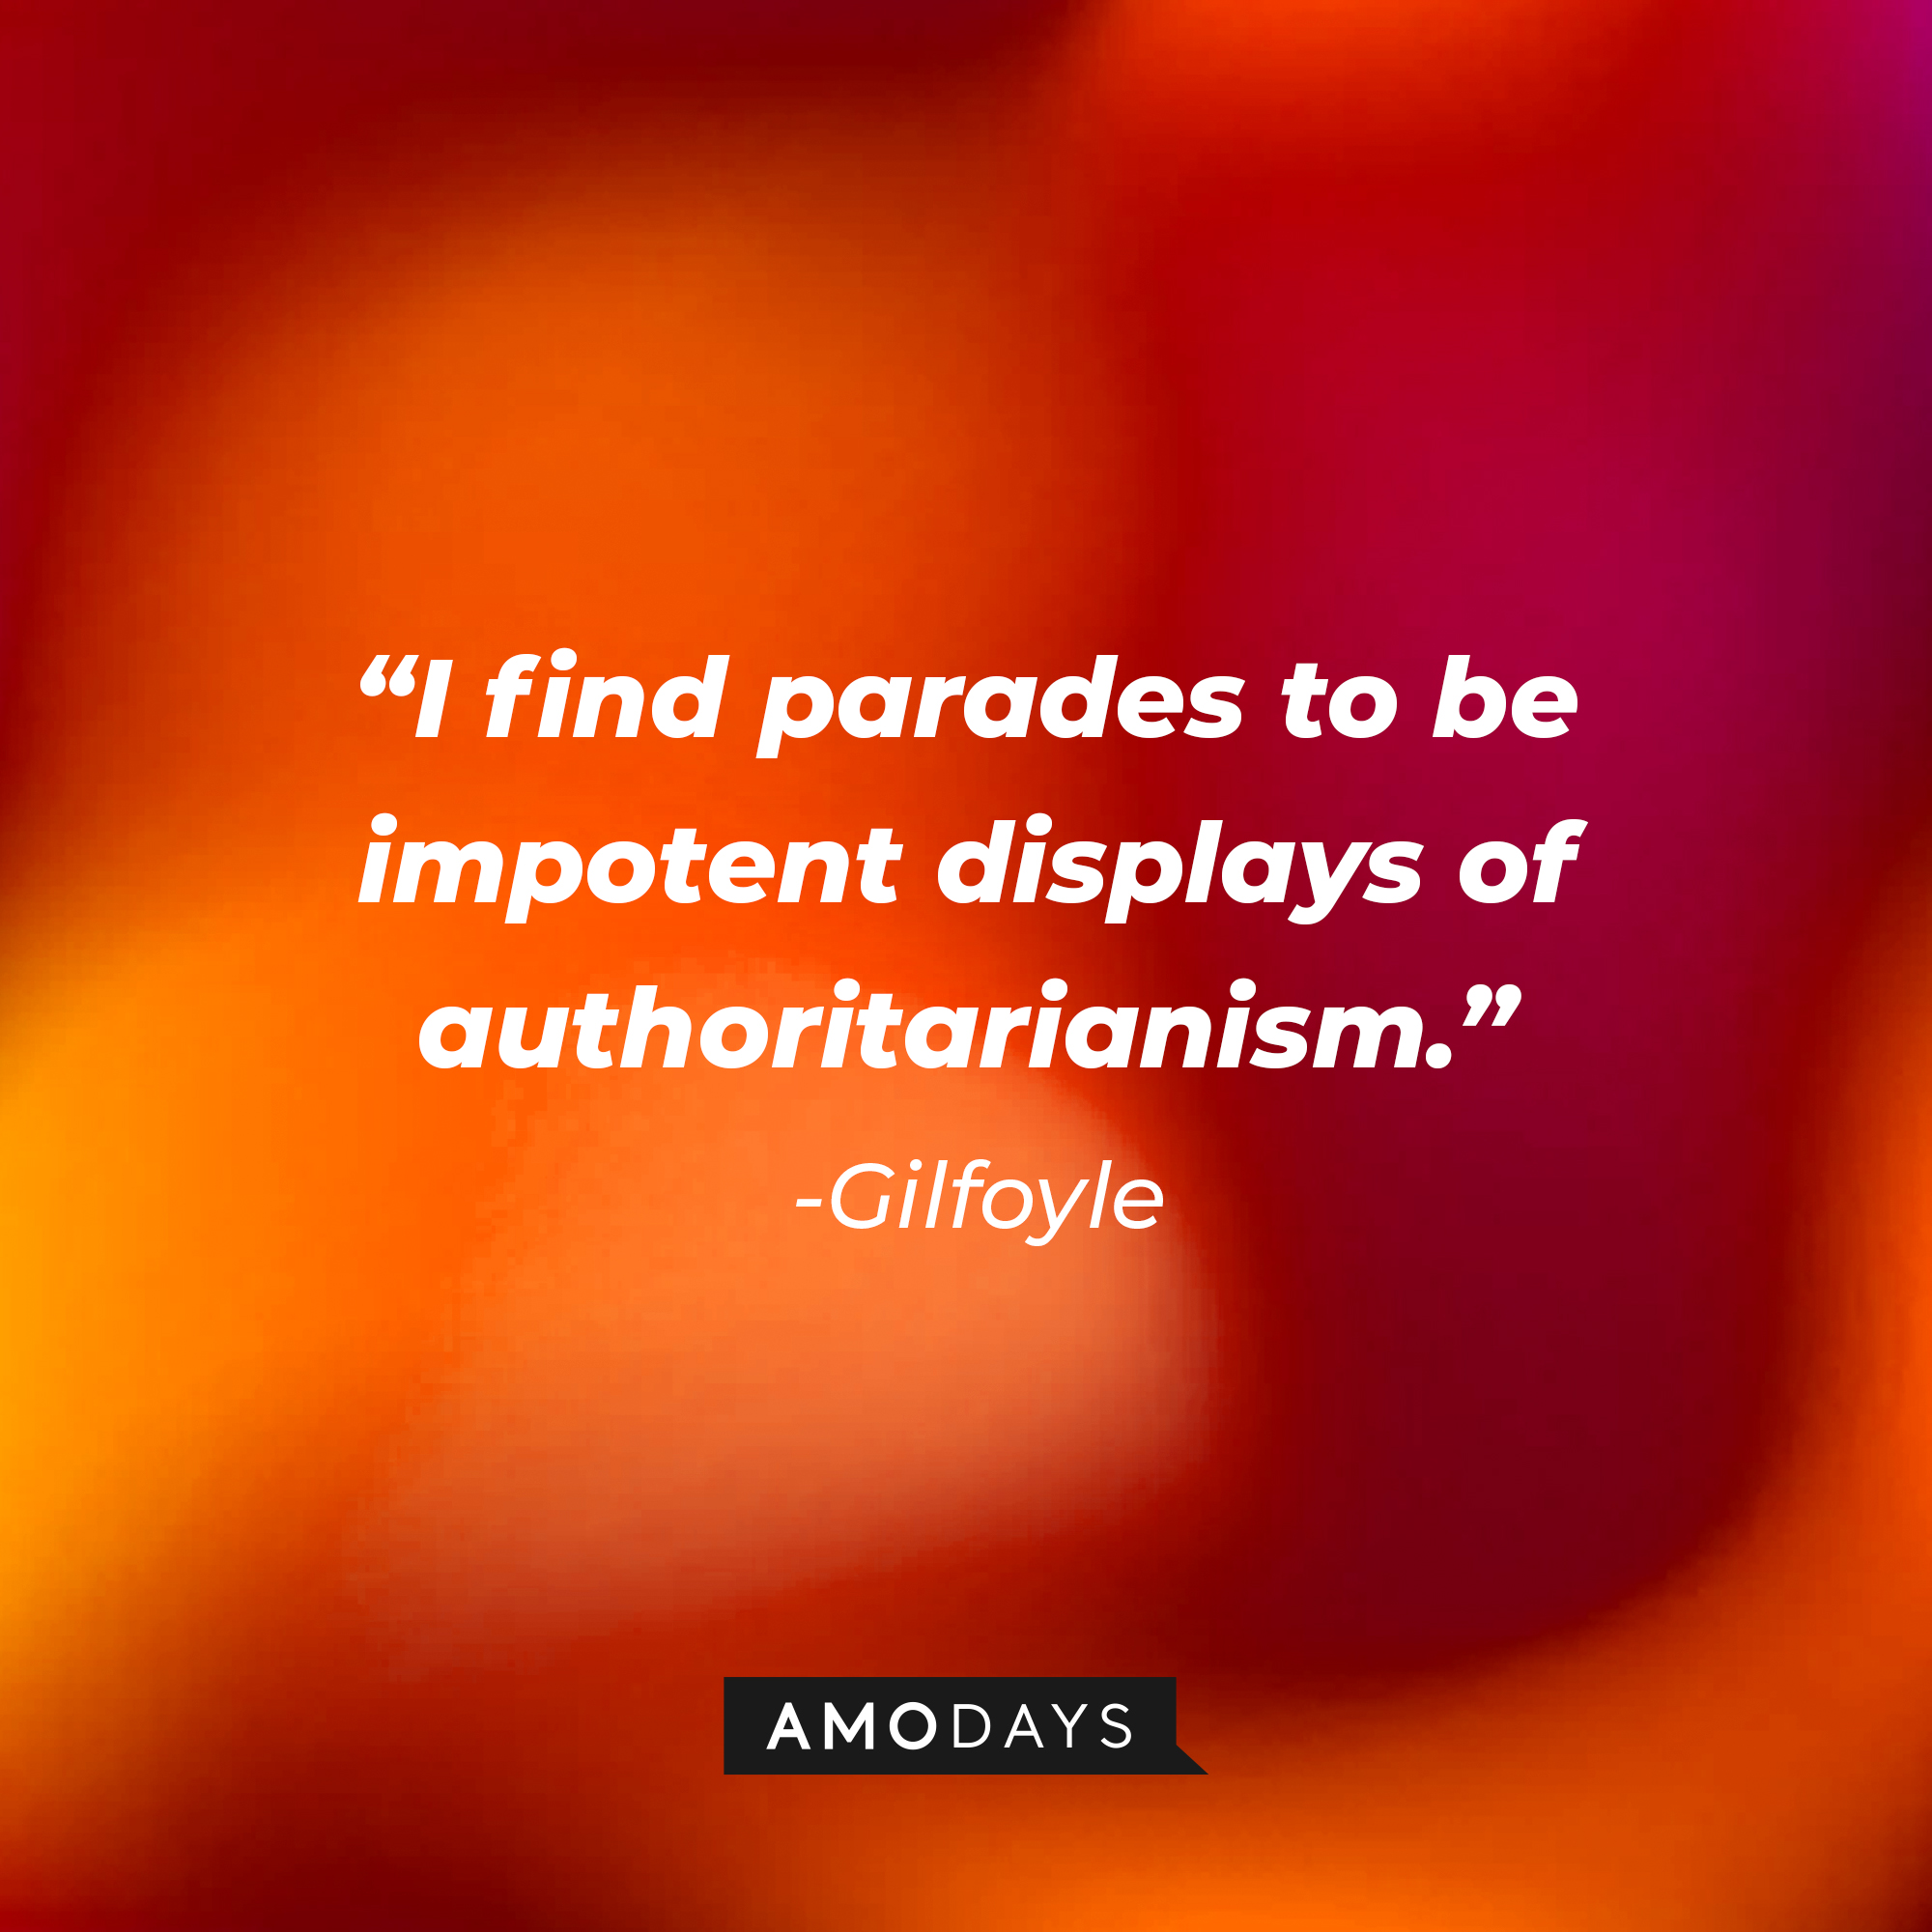 Gilfoyle's quote: “I find parades to be impotent displays of authoritarianism.” | Source: Amodays